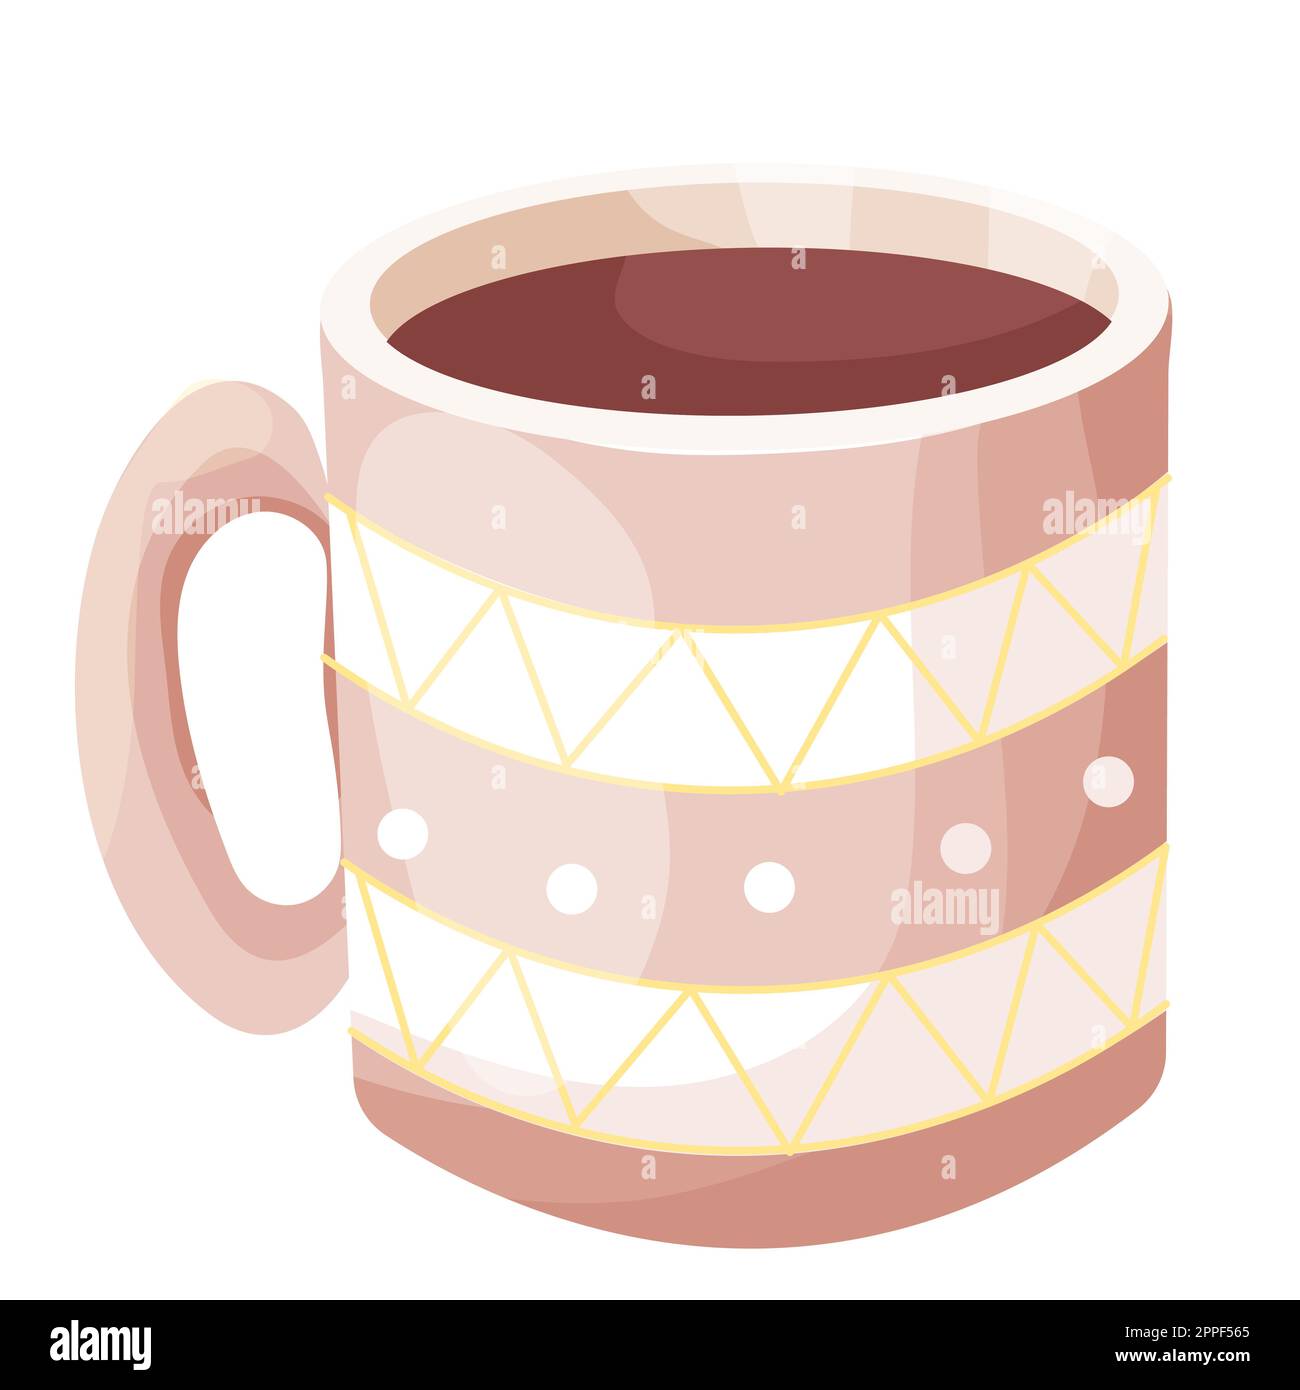 Cute And Cozy Snow Yeti Drinking Coffee Or Tea With Cookies Vector